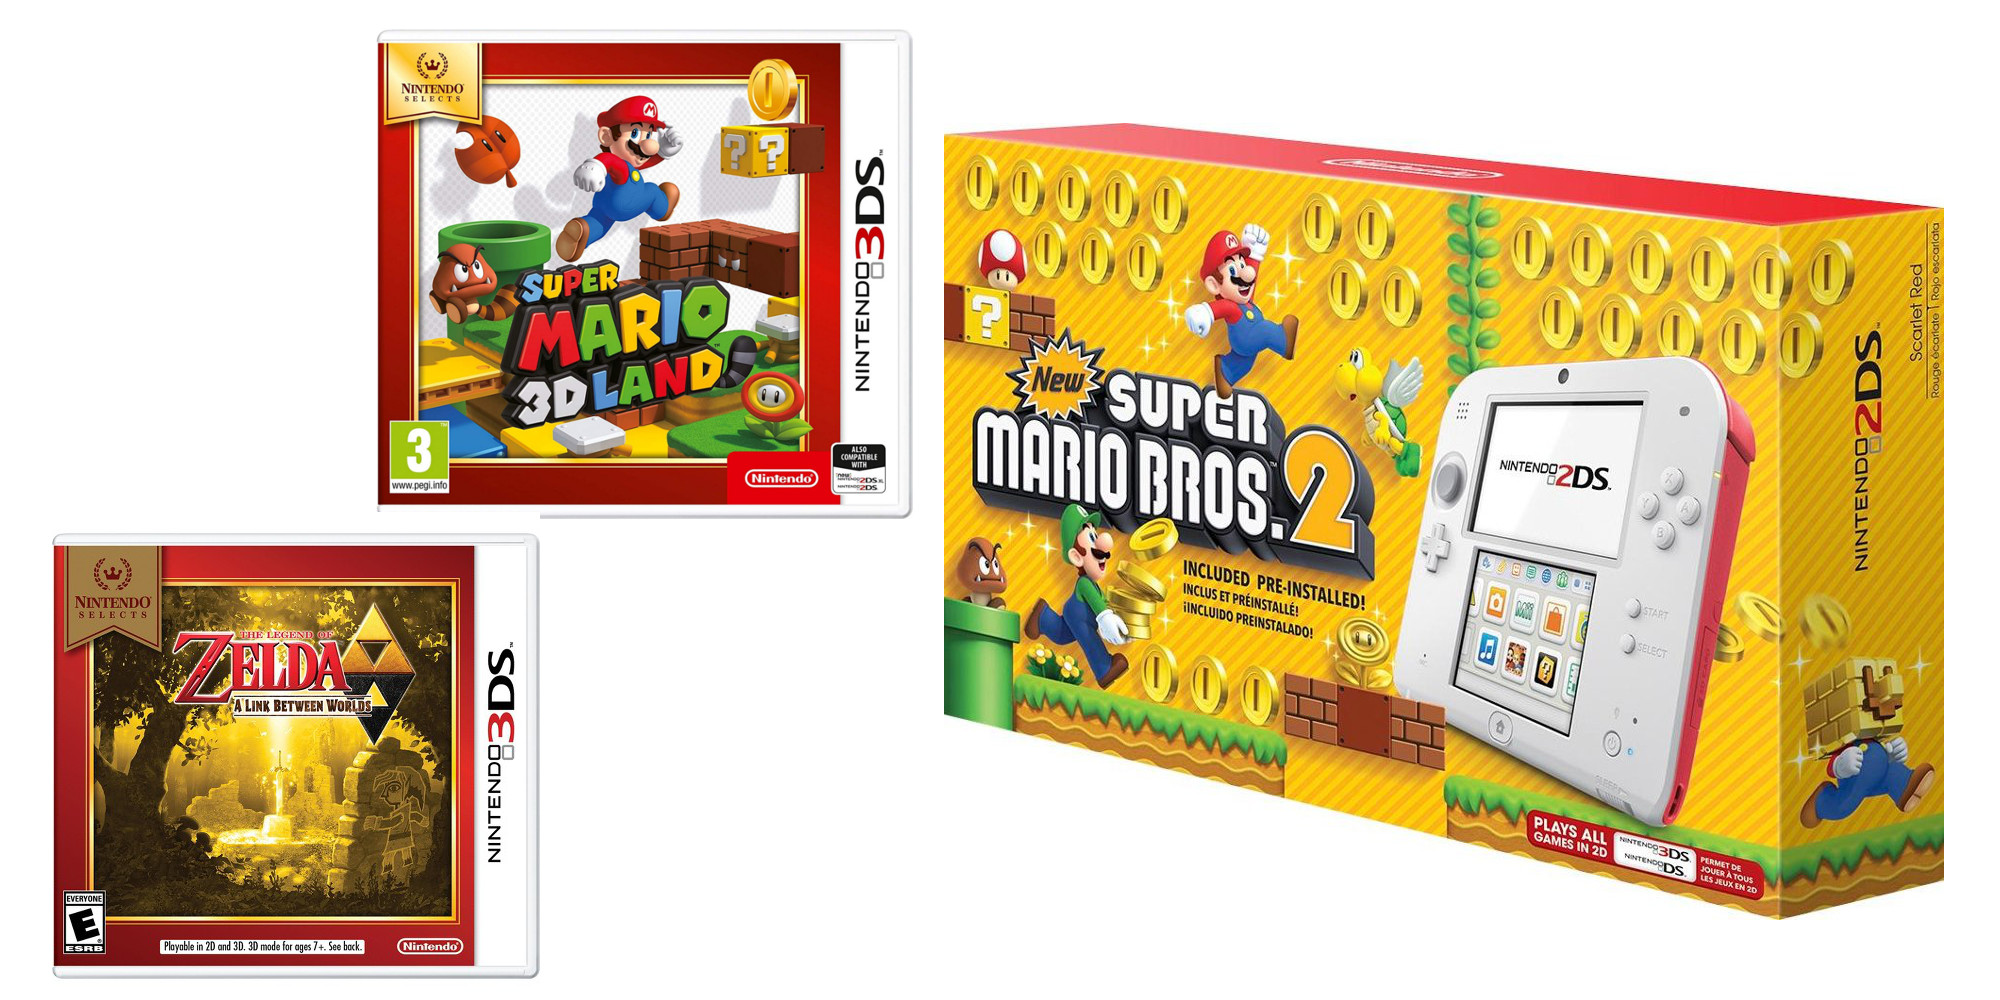 nintendo-2ds-with-super-mario-bros-2-free-game-of-your-choice-for-80